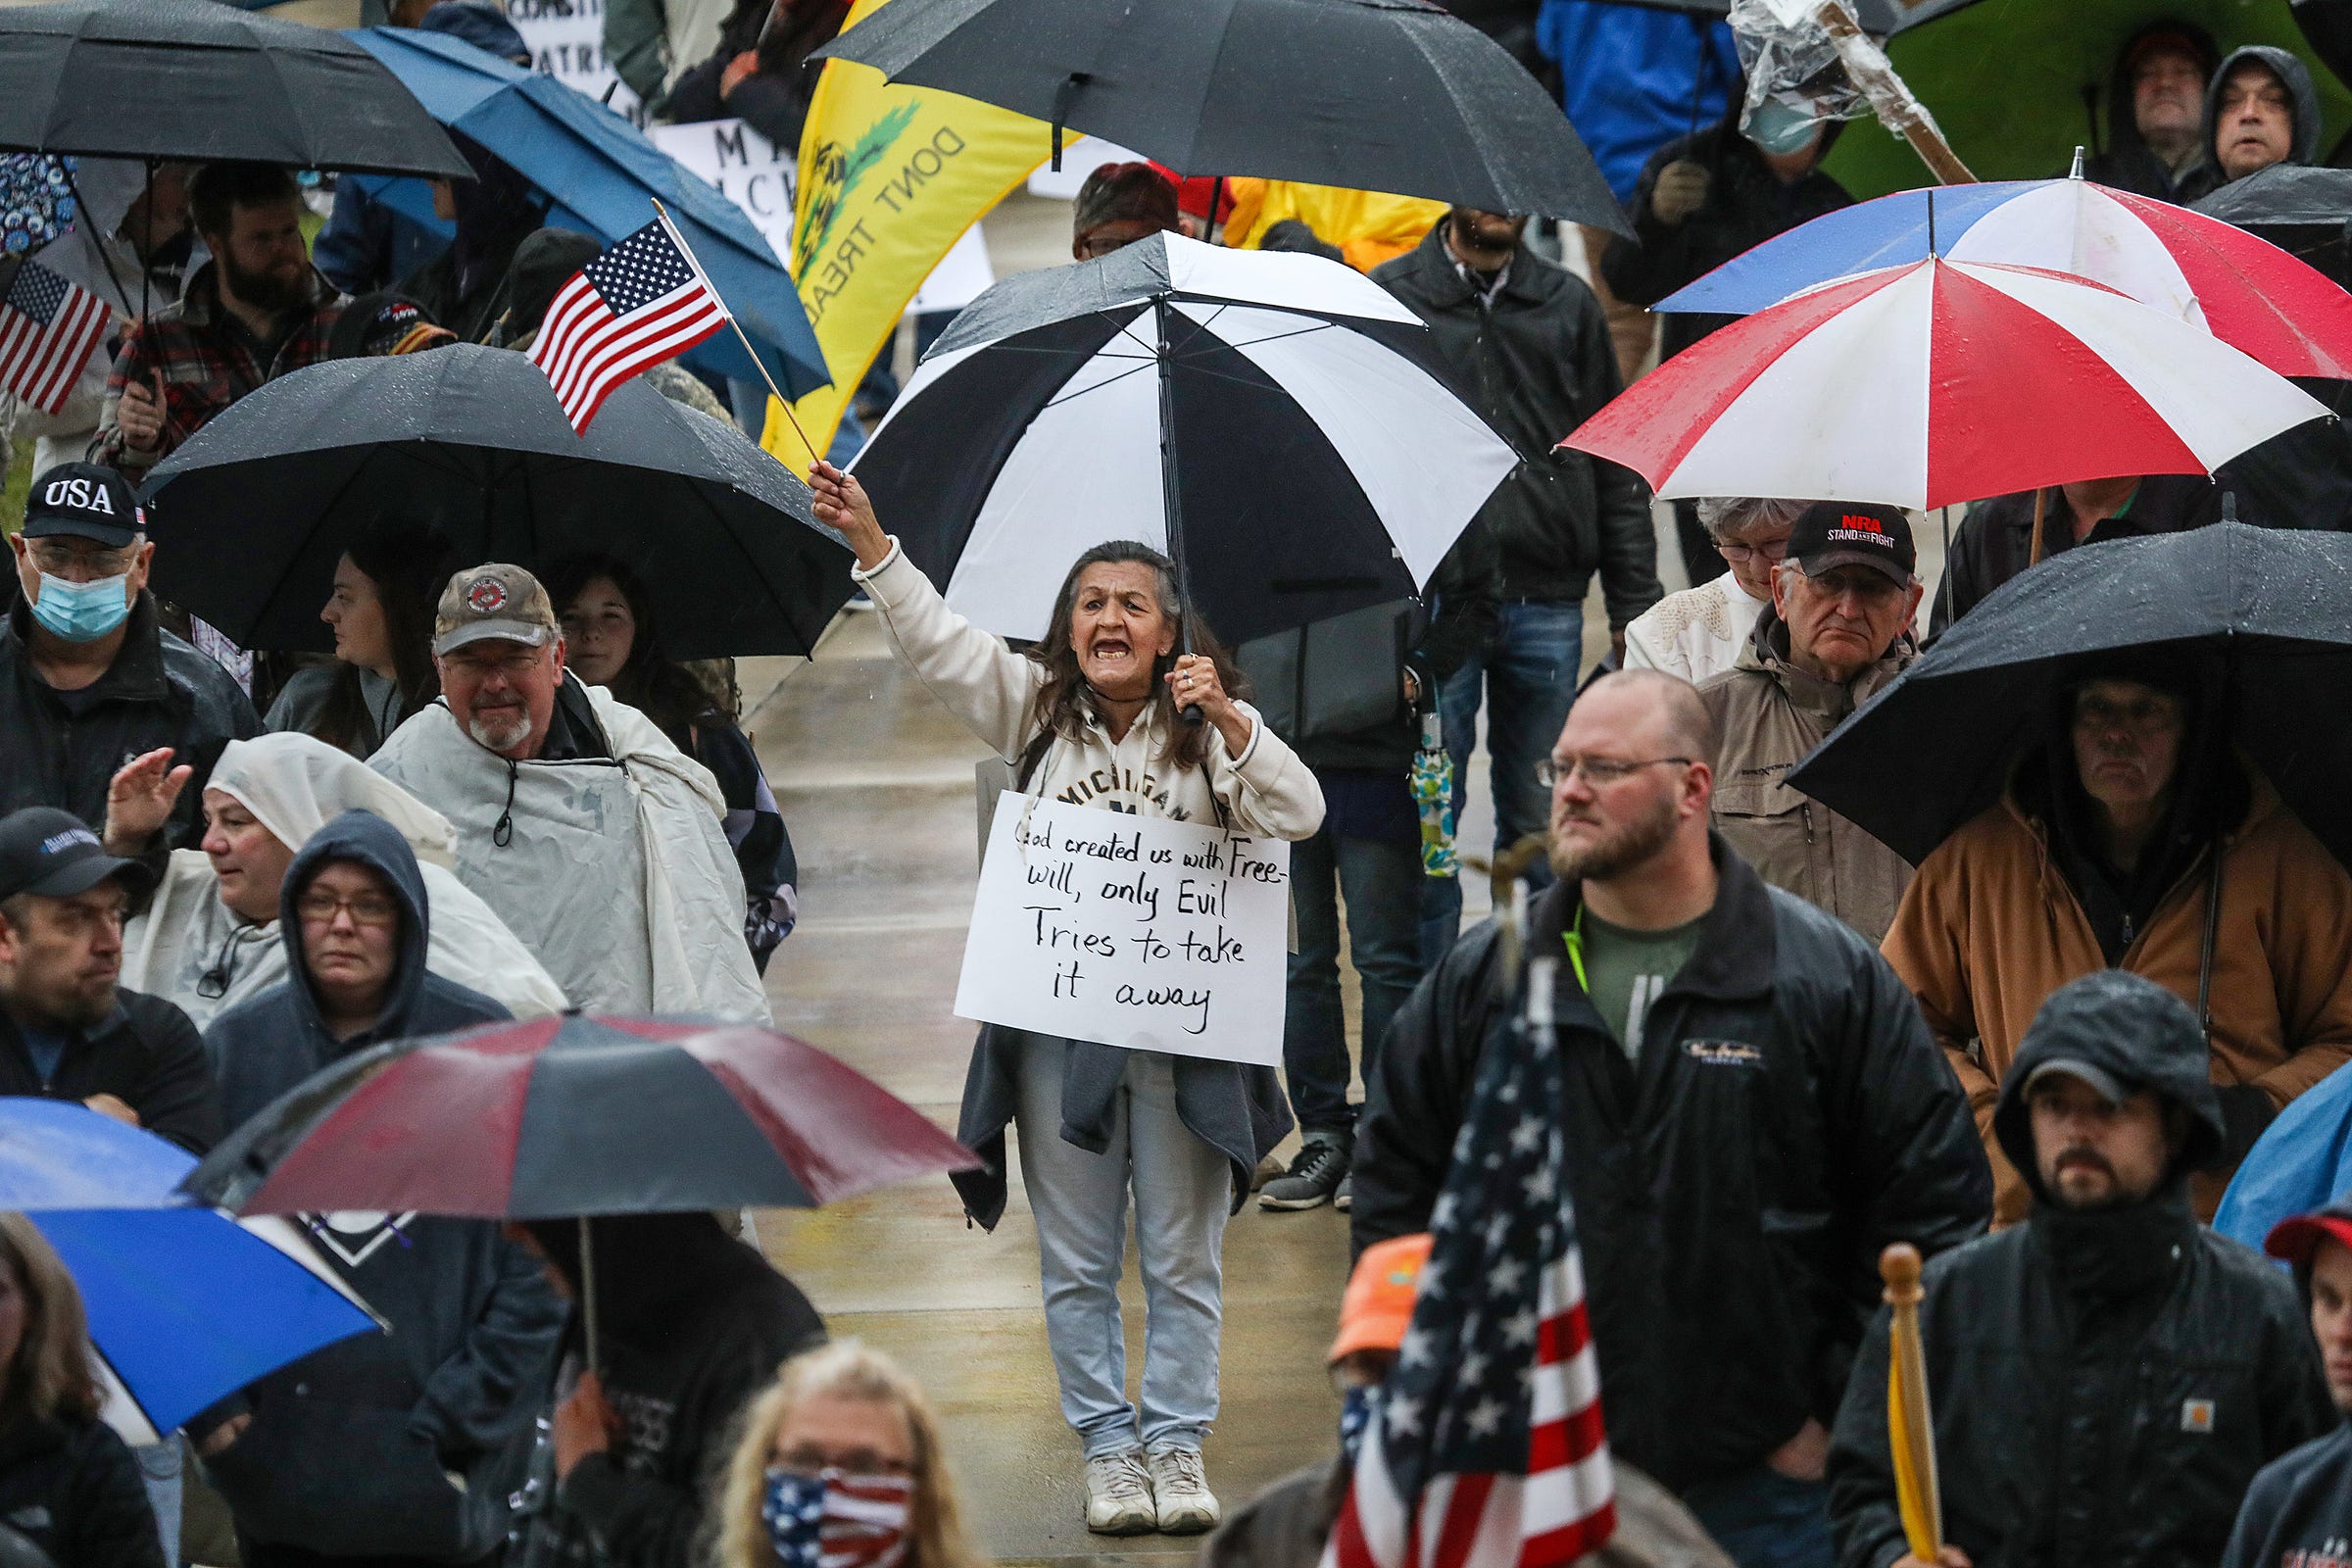 Protestors listen to a speaker on the Capitol steps during a protest rally against Gov. Gretchen Whitmer's order to stay home during the COVID-19 pandemic in Lansing, Mich. on Thursday, May 14, 2020. 